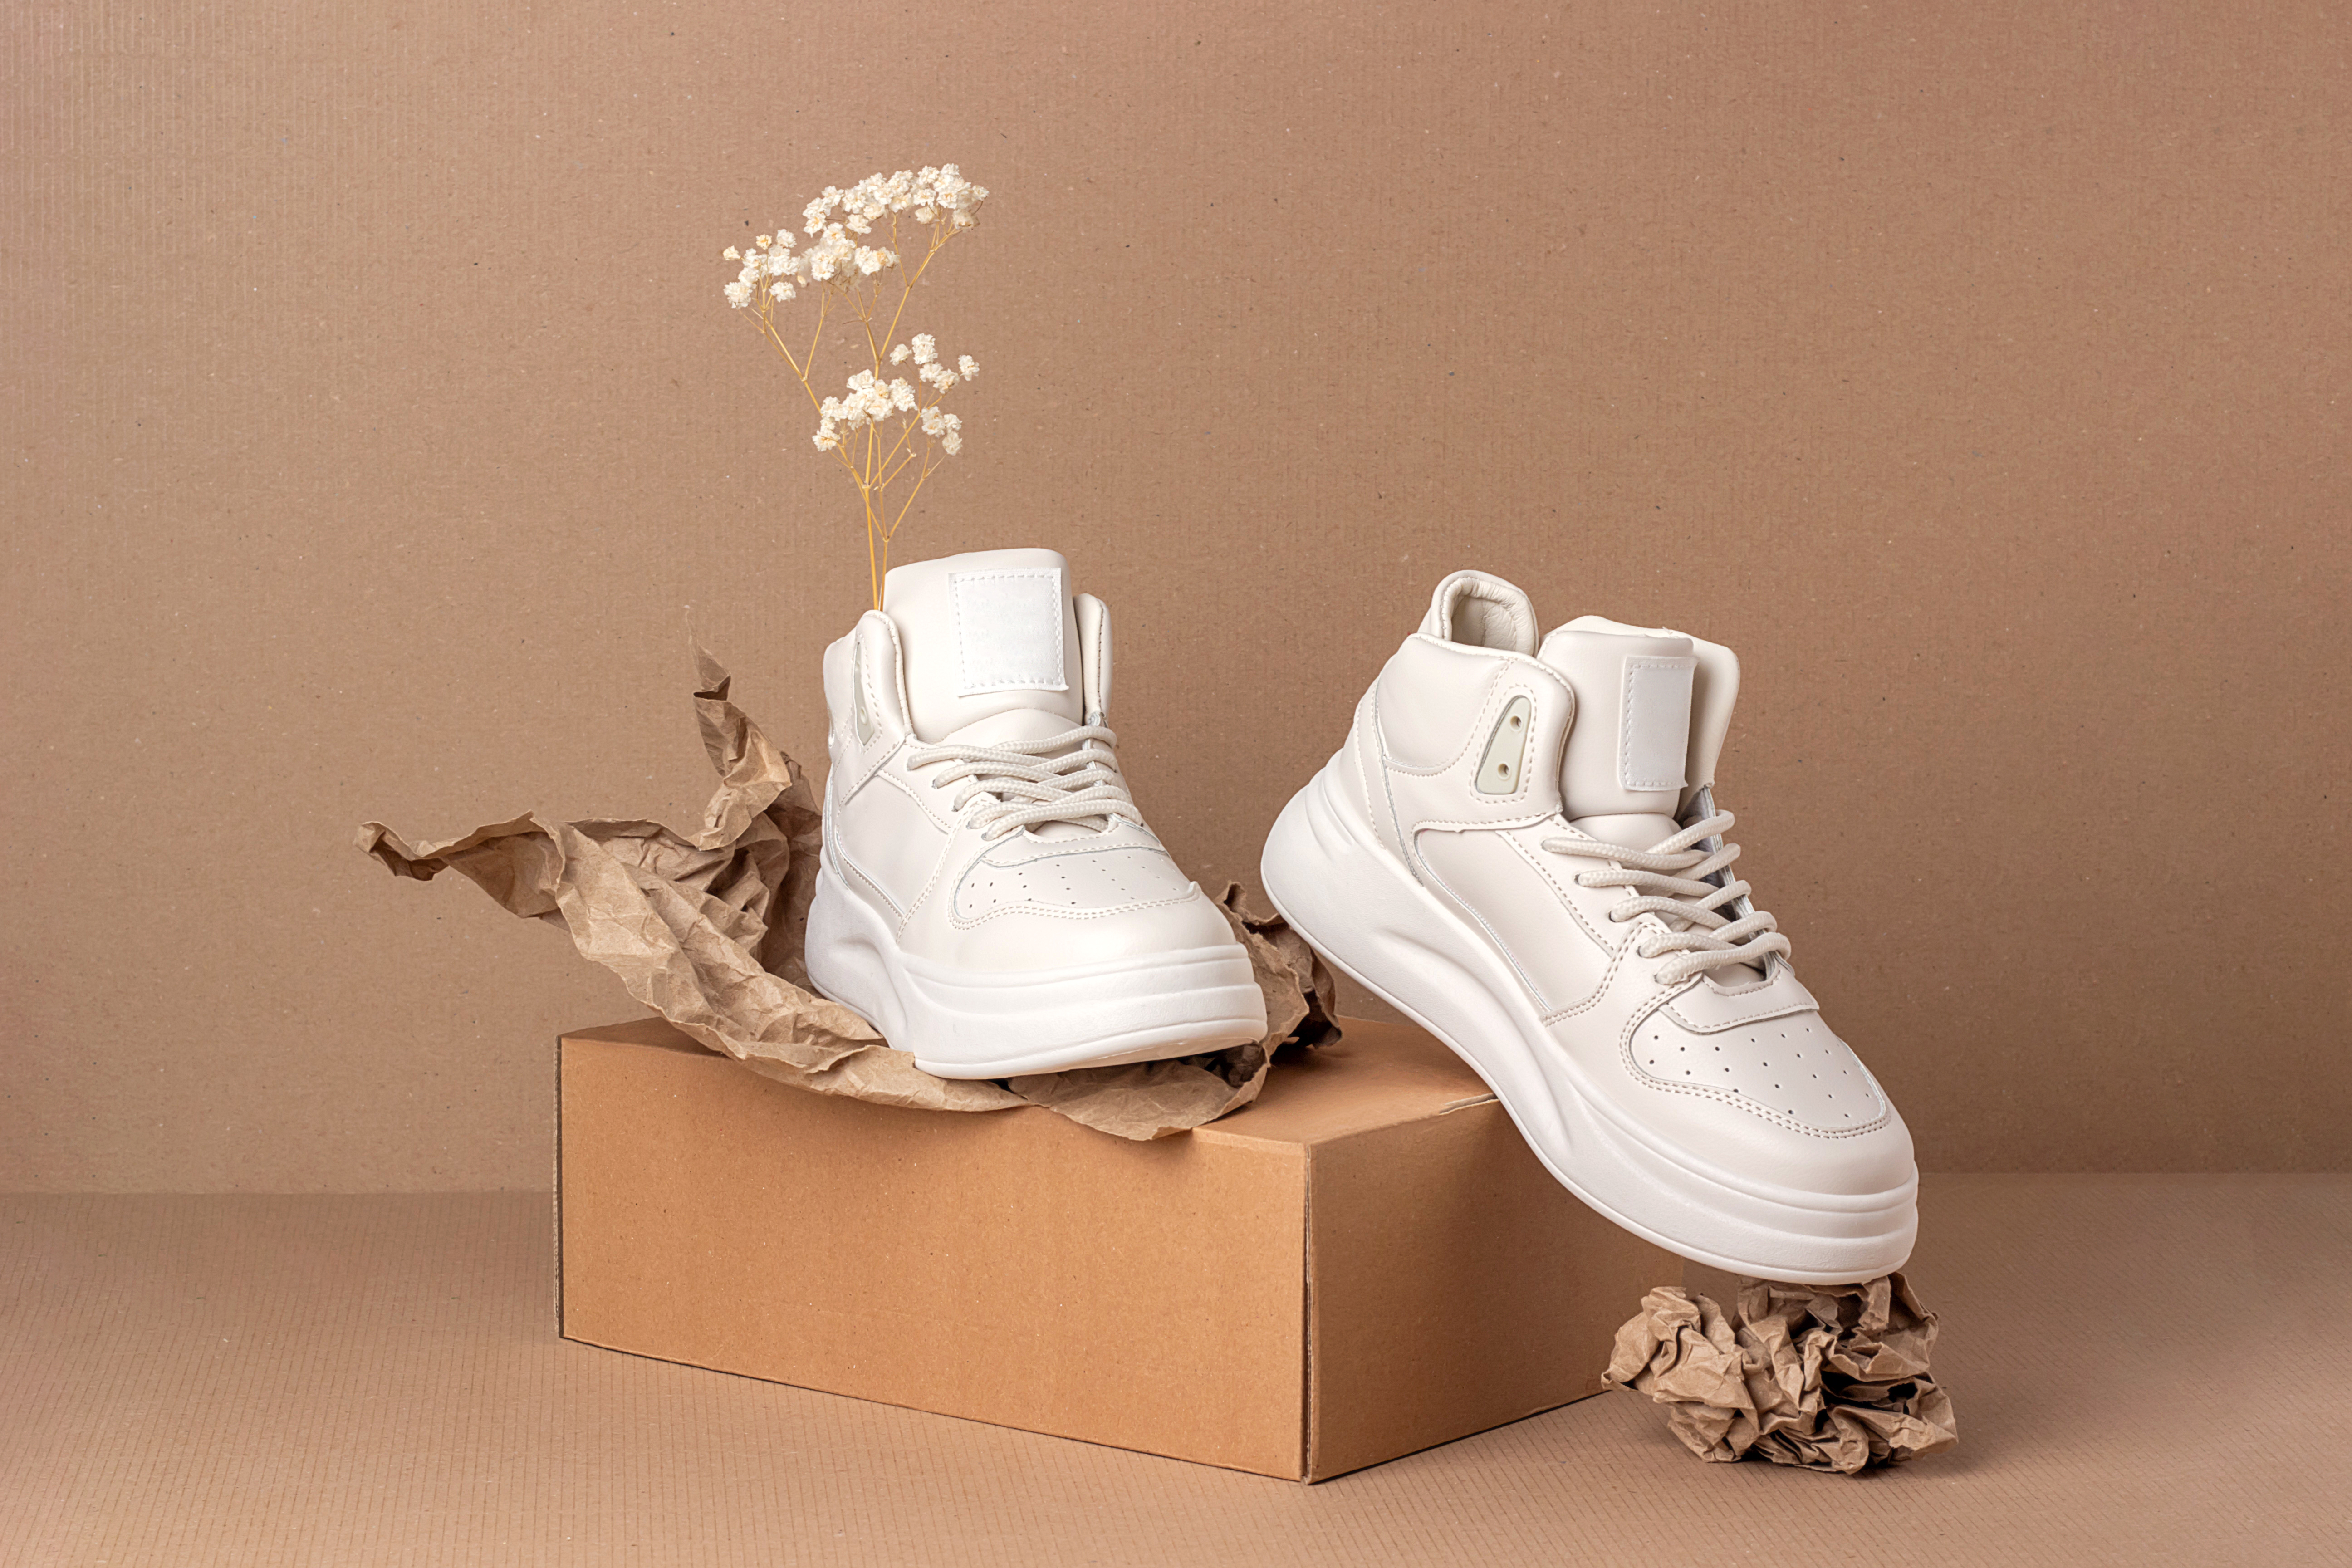 eco-leather-shoes-pair-beige-sneakers-with-dry-flowers-brown-background-casual-sport-lifestyle-concept